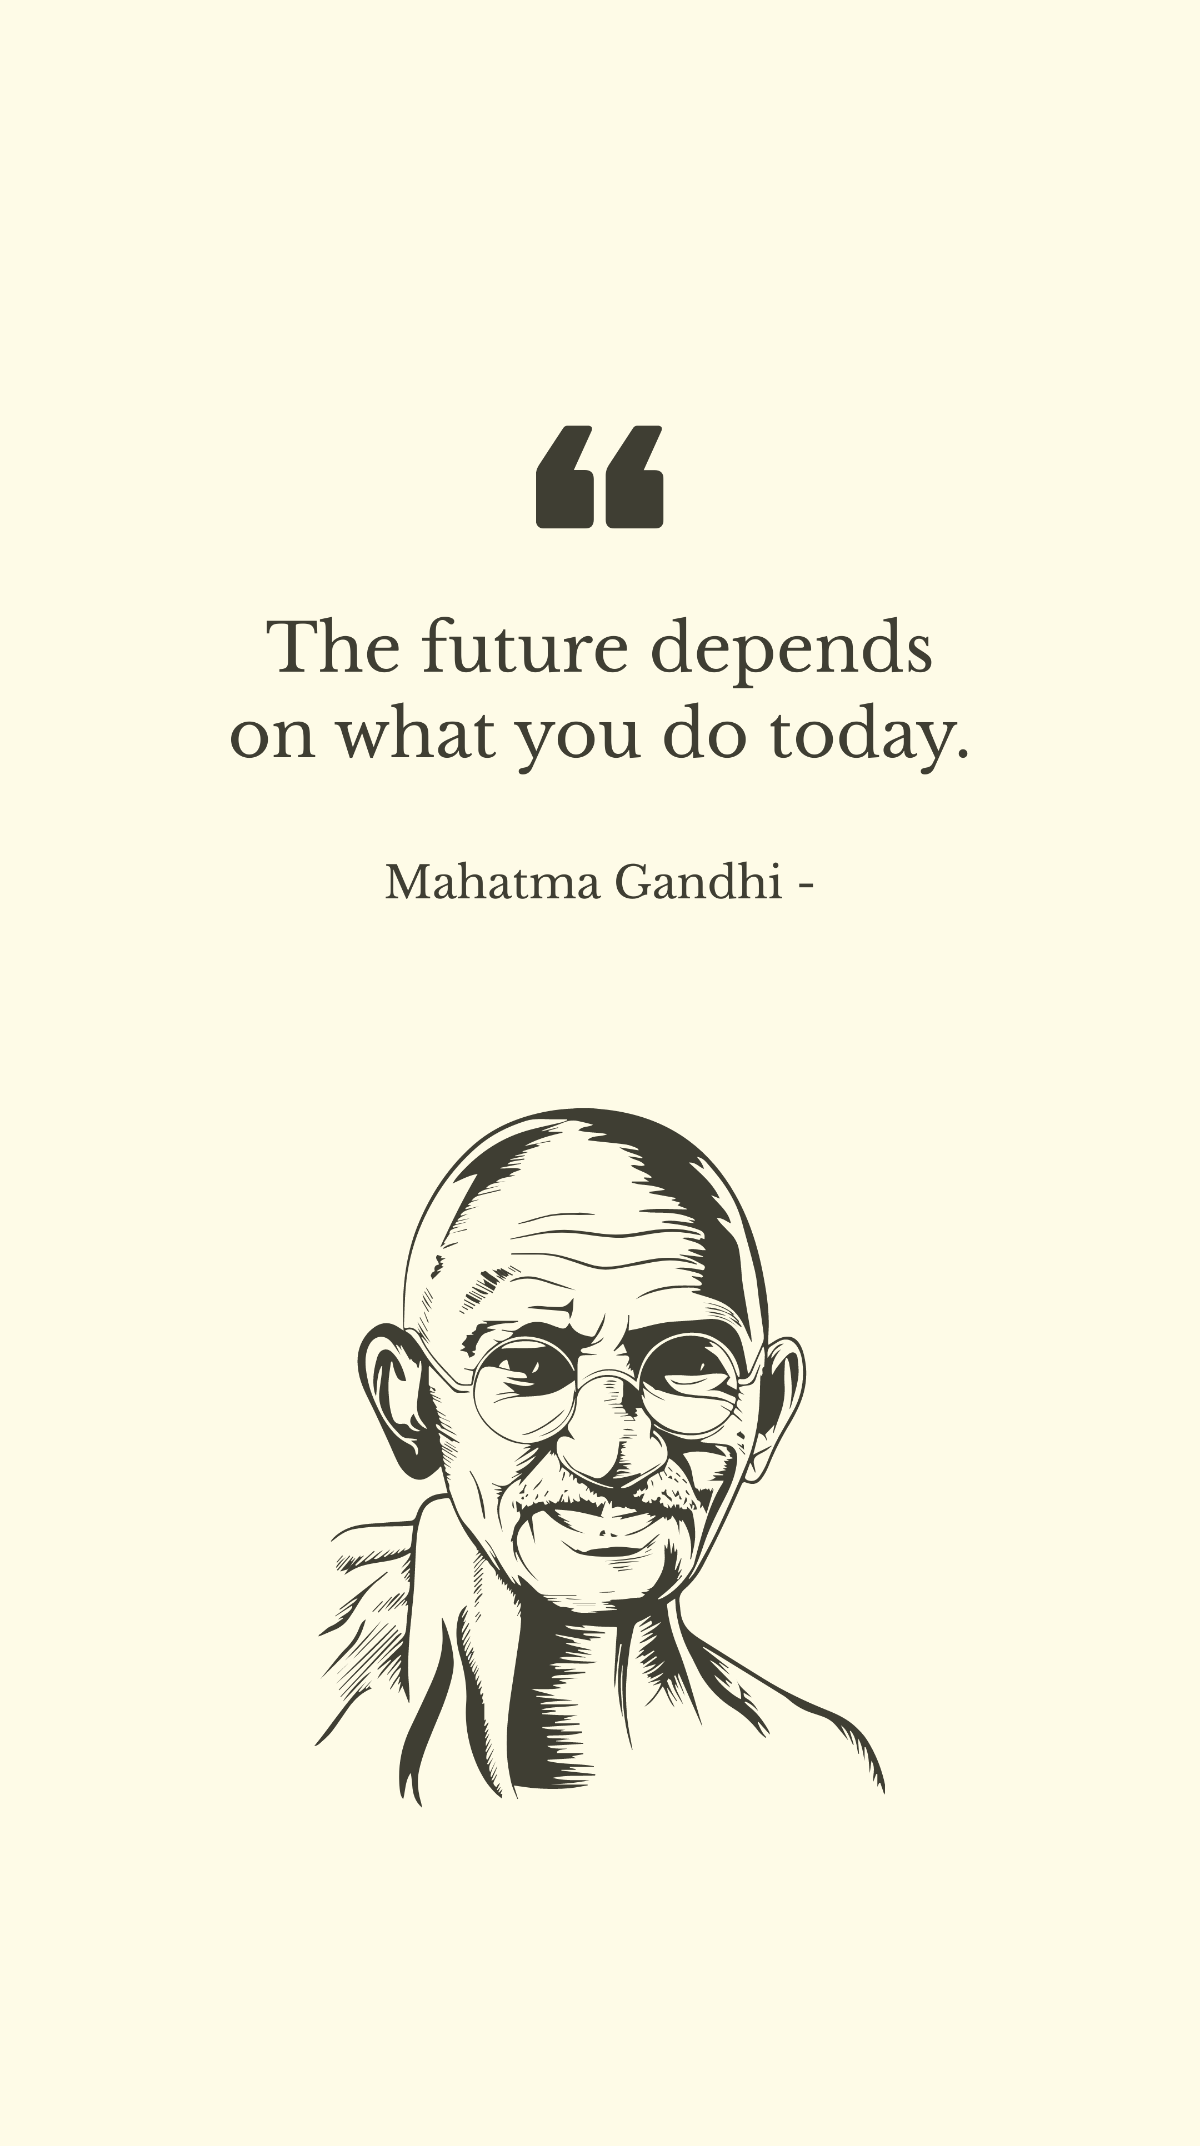 Free Mahatma Gandhi - The future depends on what you do today. Template